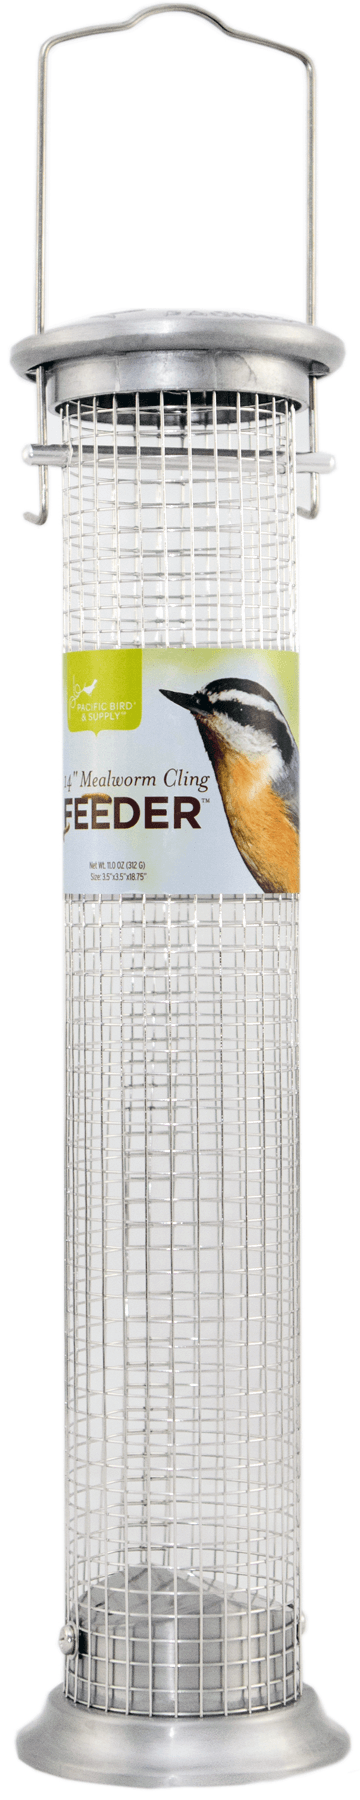 Mealworm Cling Feeder